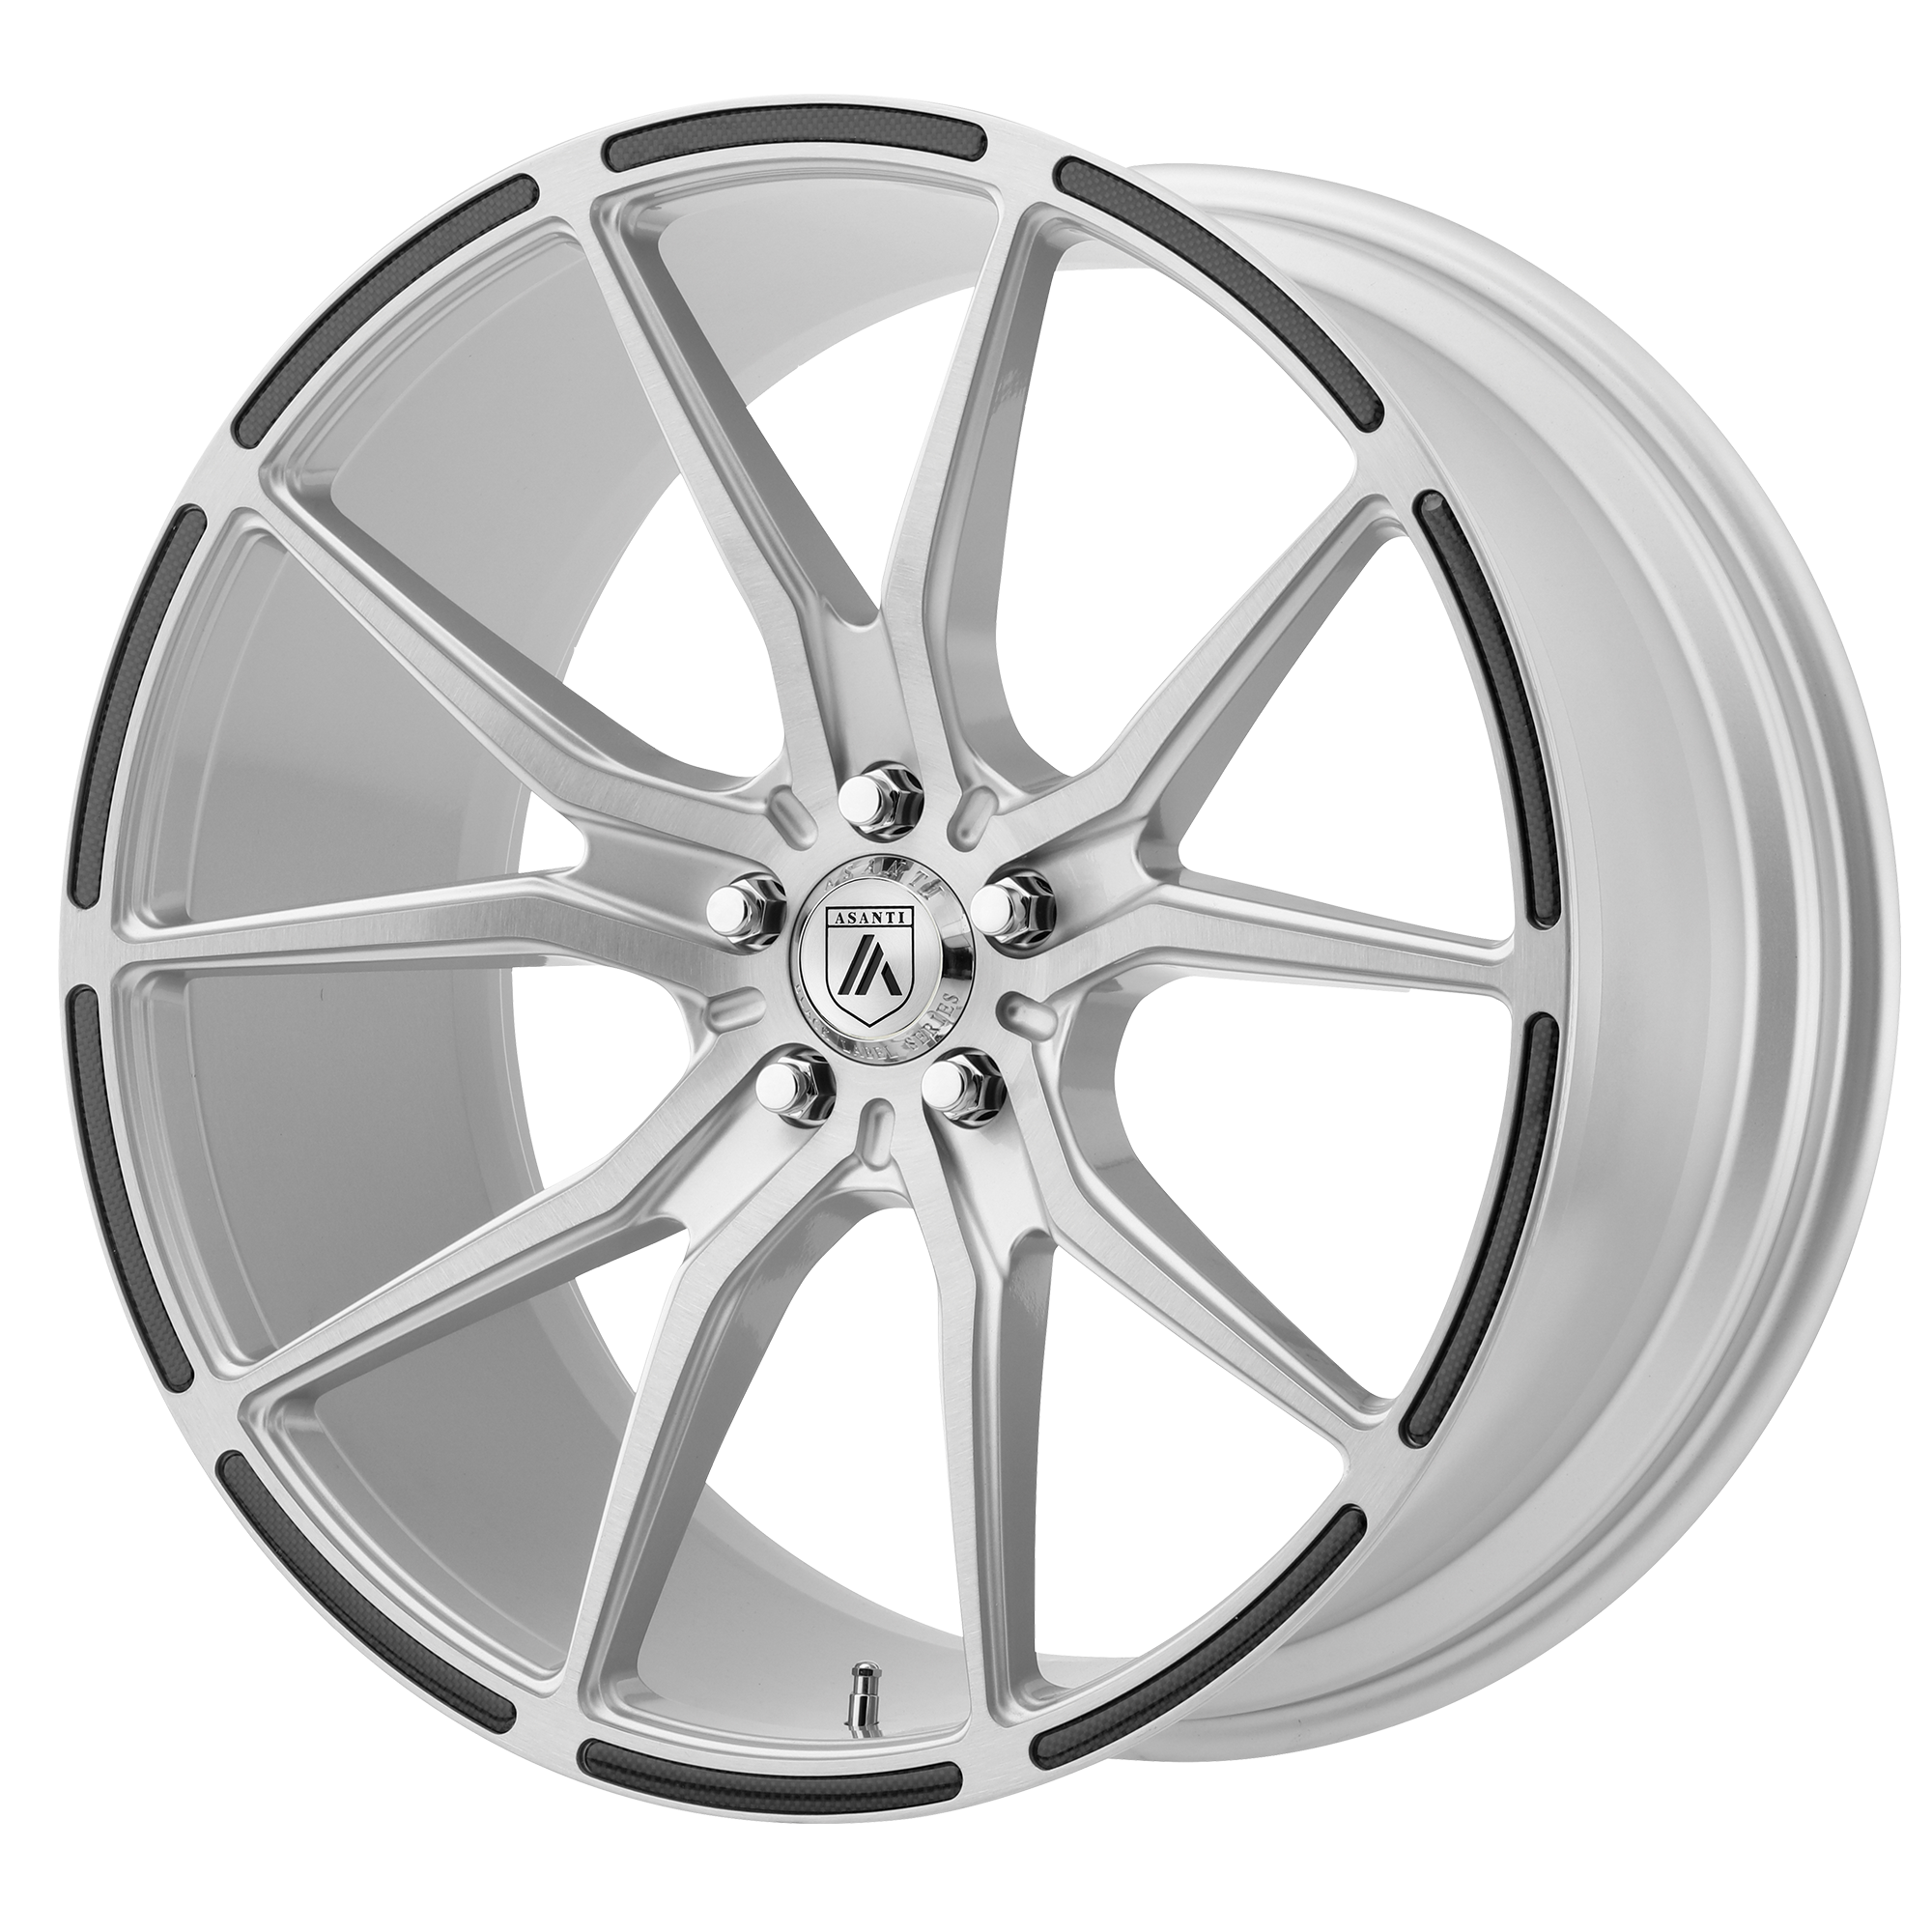 VEGA 22x10.5 Blank BRUSHED SILVER W/ CARBON FIBER INSERTS (25.00 - 34.00 mm) - Tires and Engine Performance